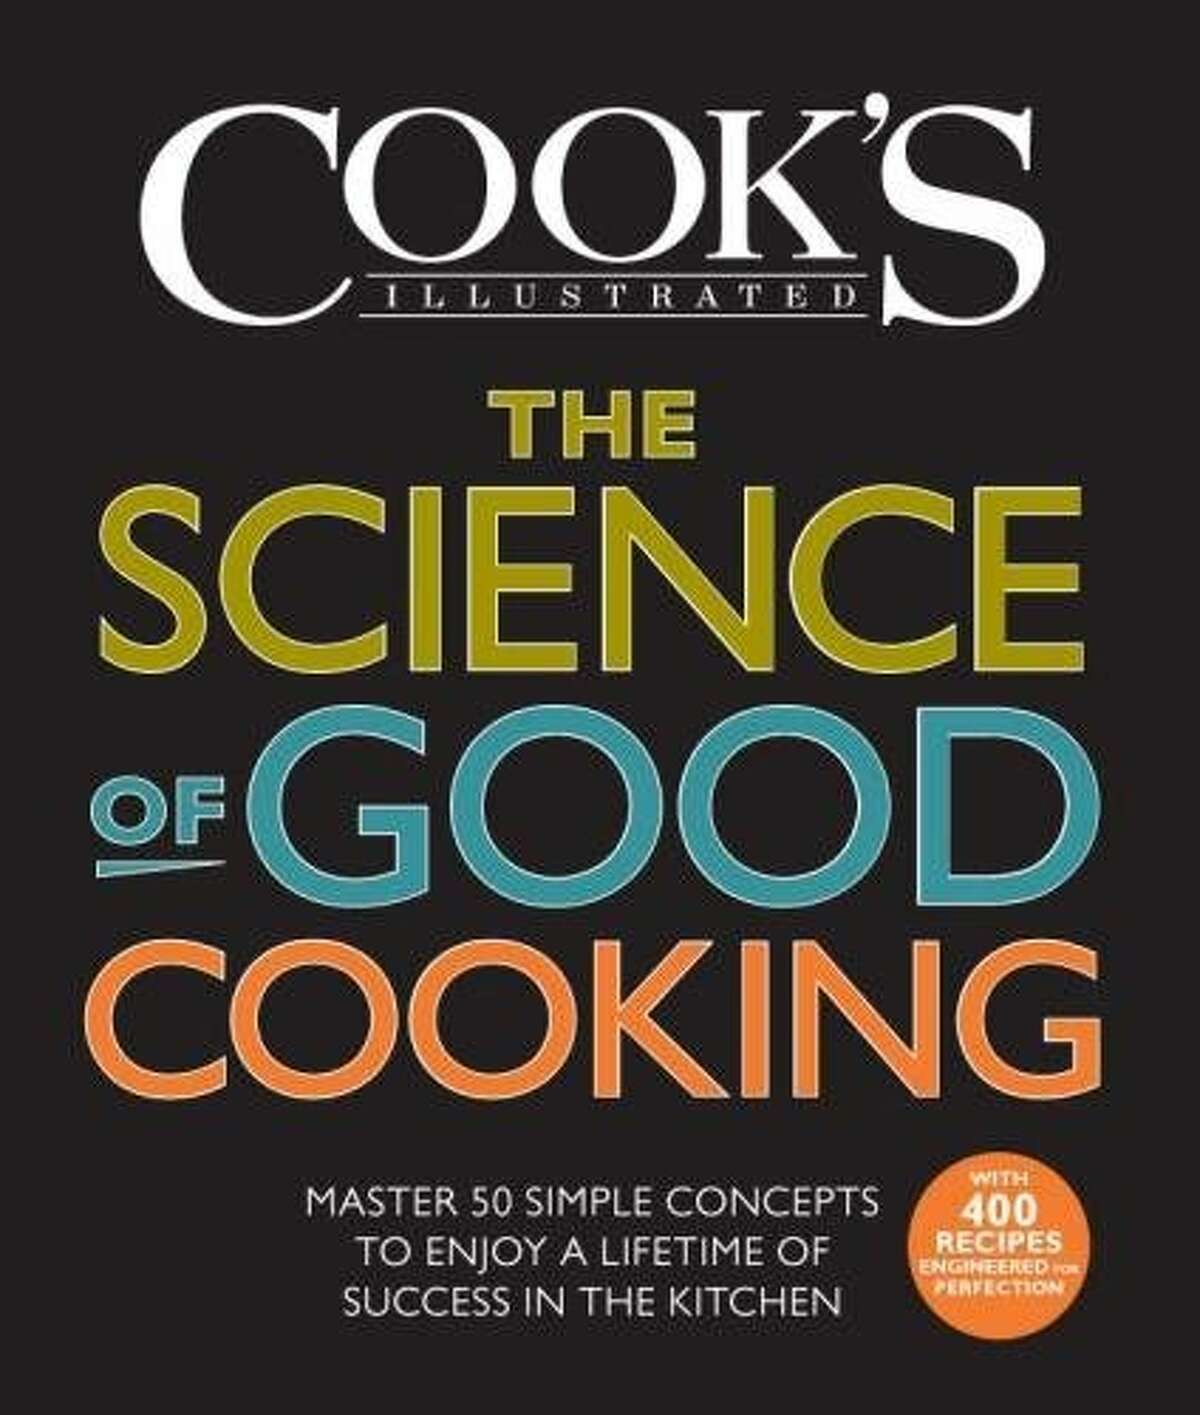 The Science of Good Cooking, by The Editors of America's Test Kitchen and Guy Crosby Ph.D